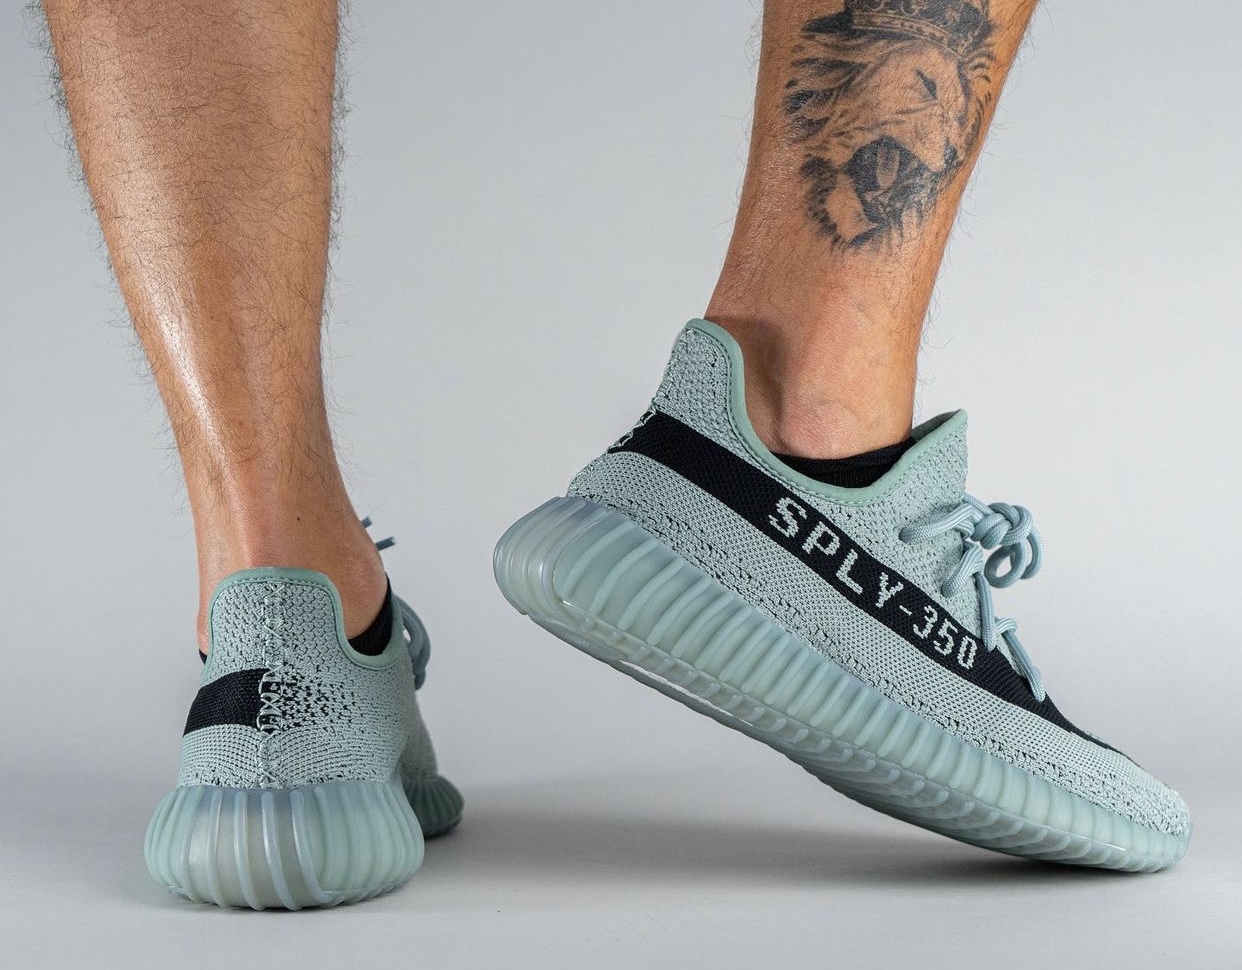 A Sneak Peek At The adidas Yeezy Boost 350 V2 True Form Jade Ash HQ2060 Release Date On-Feet